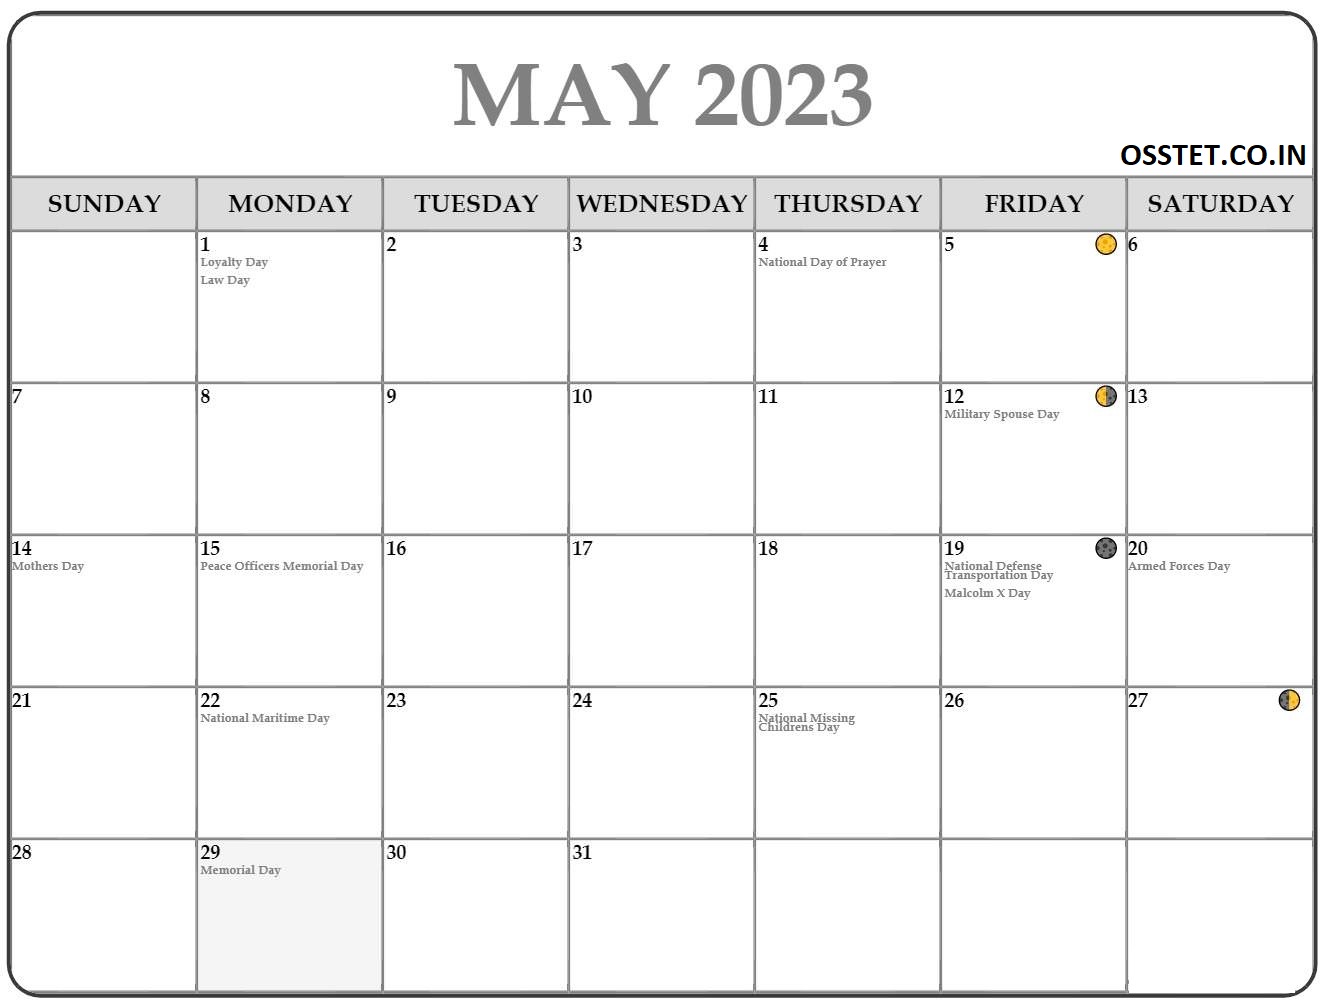 May 2023 moon phases for gardening and fishing